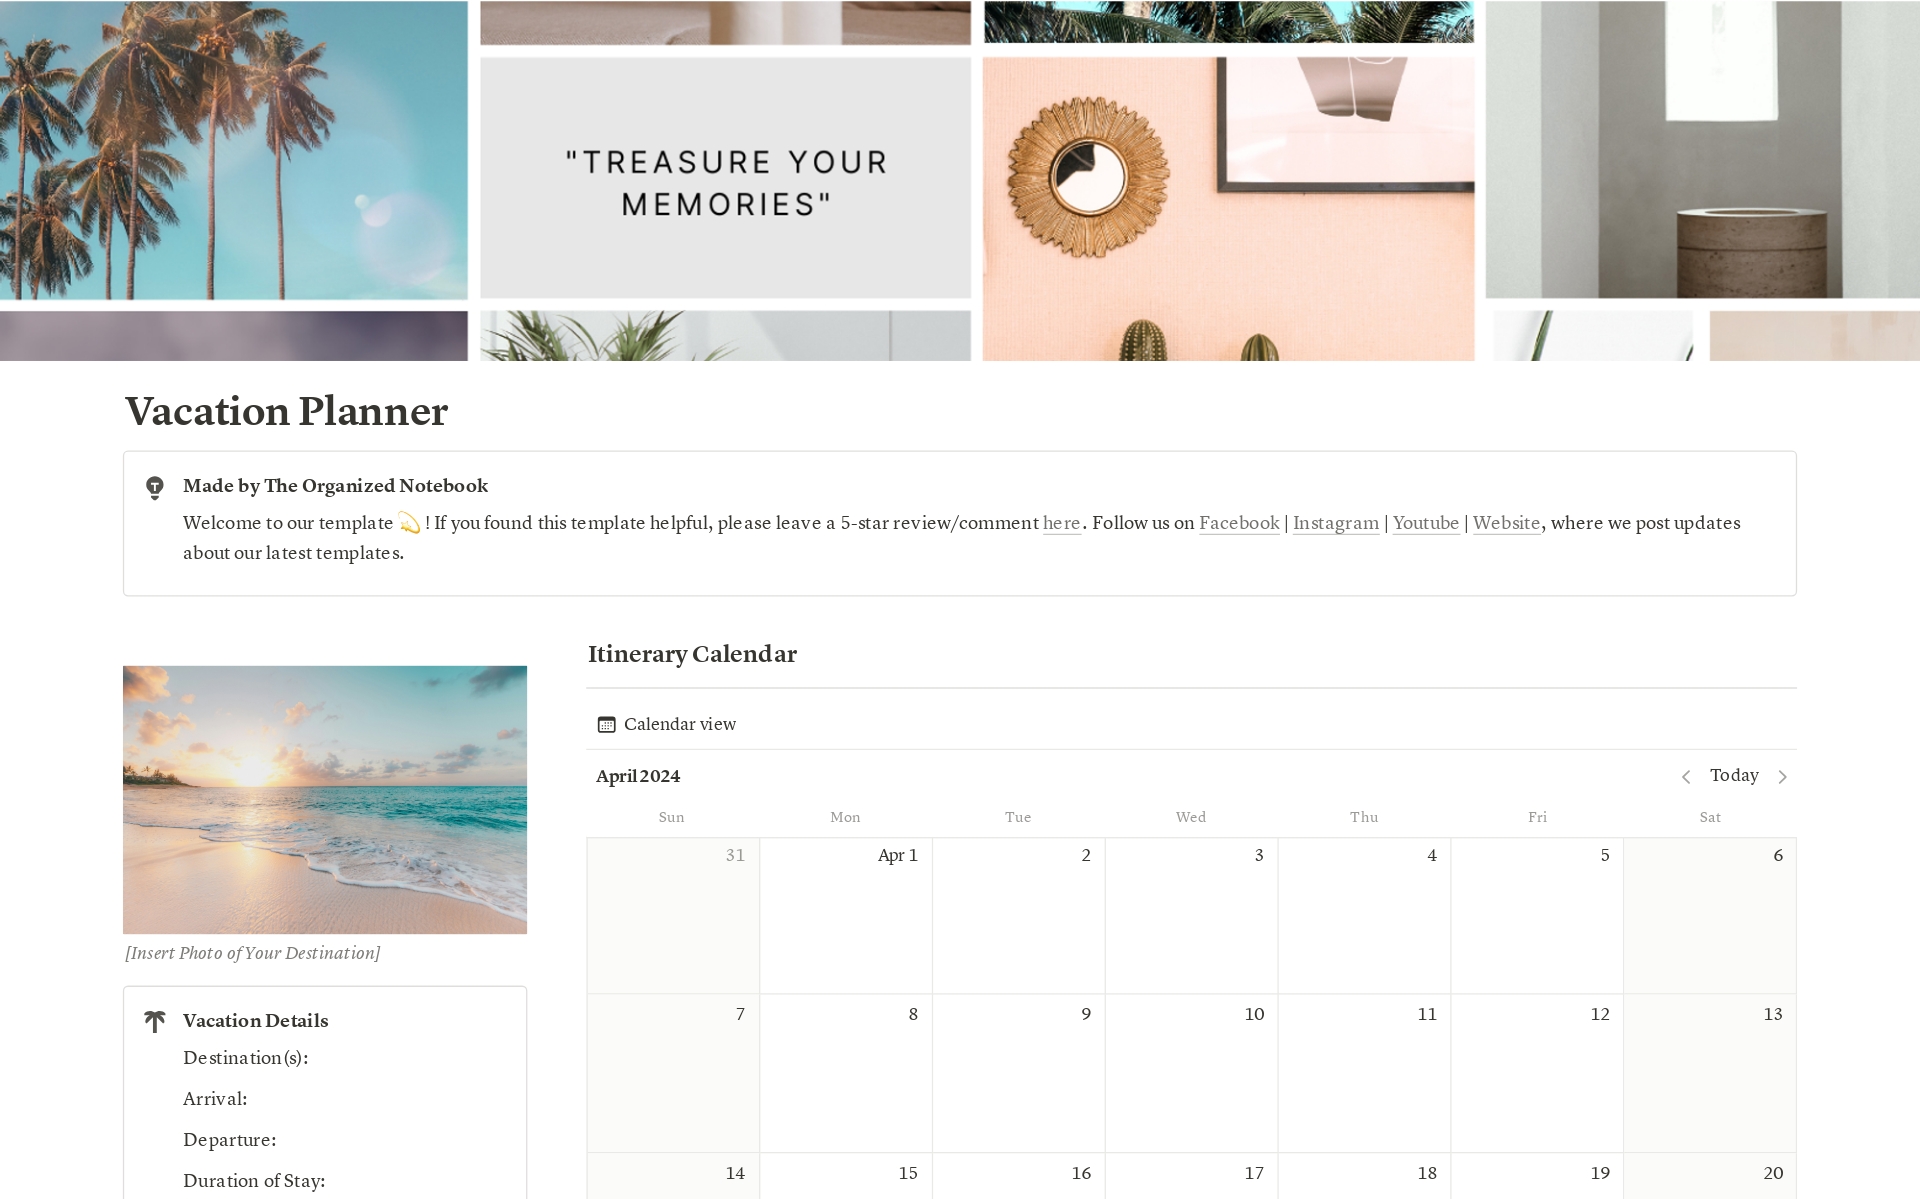 This template is perfect for short-term vacations that you need to plan quickly!